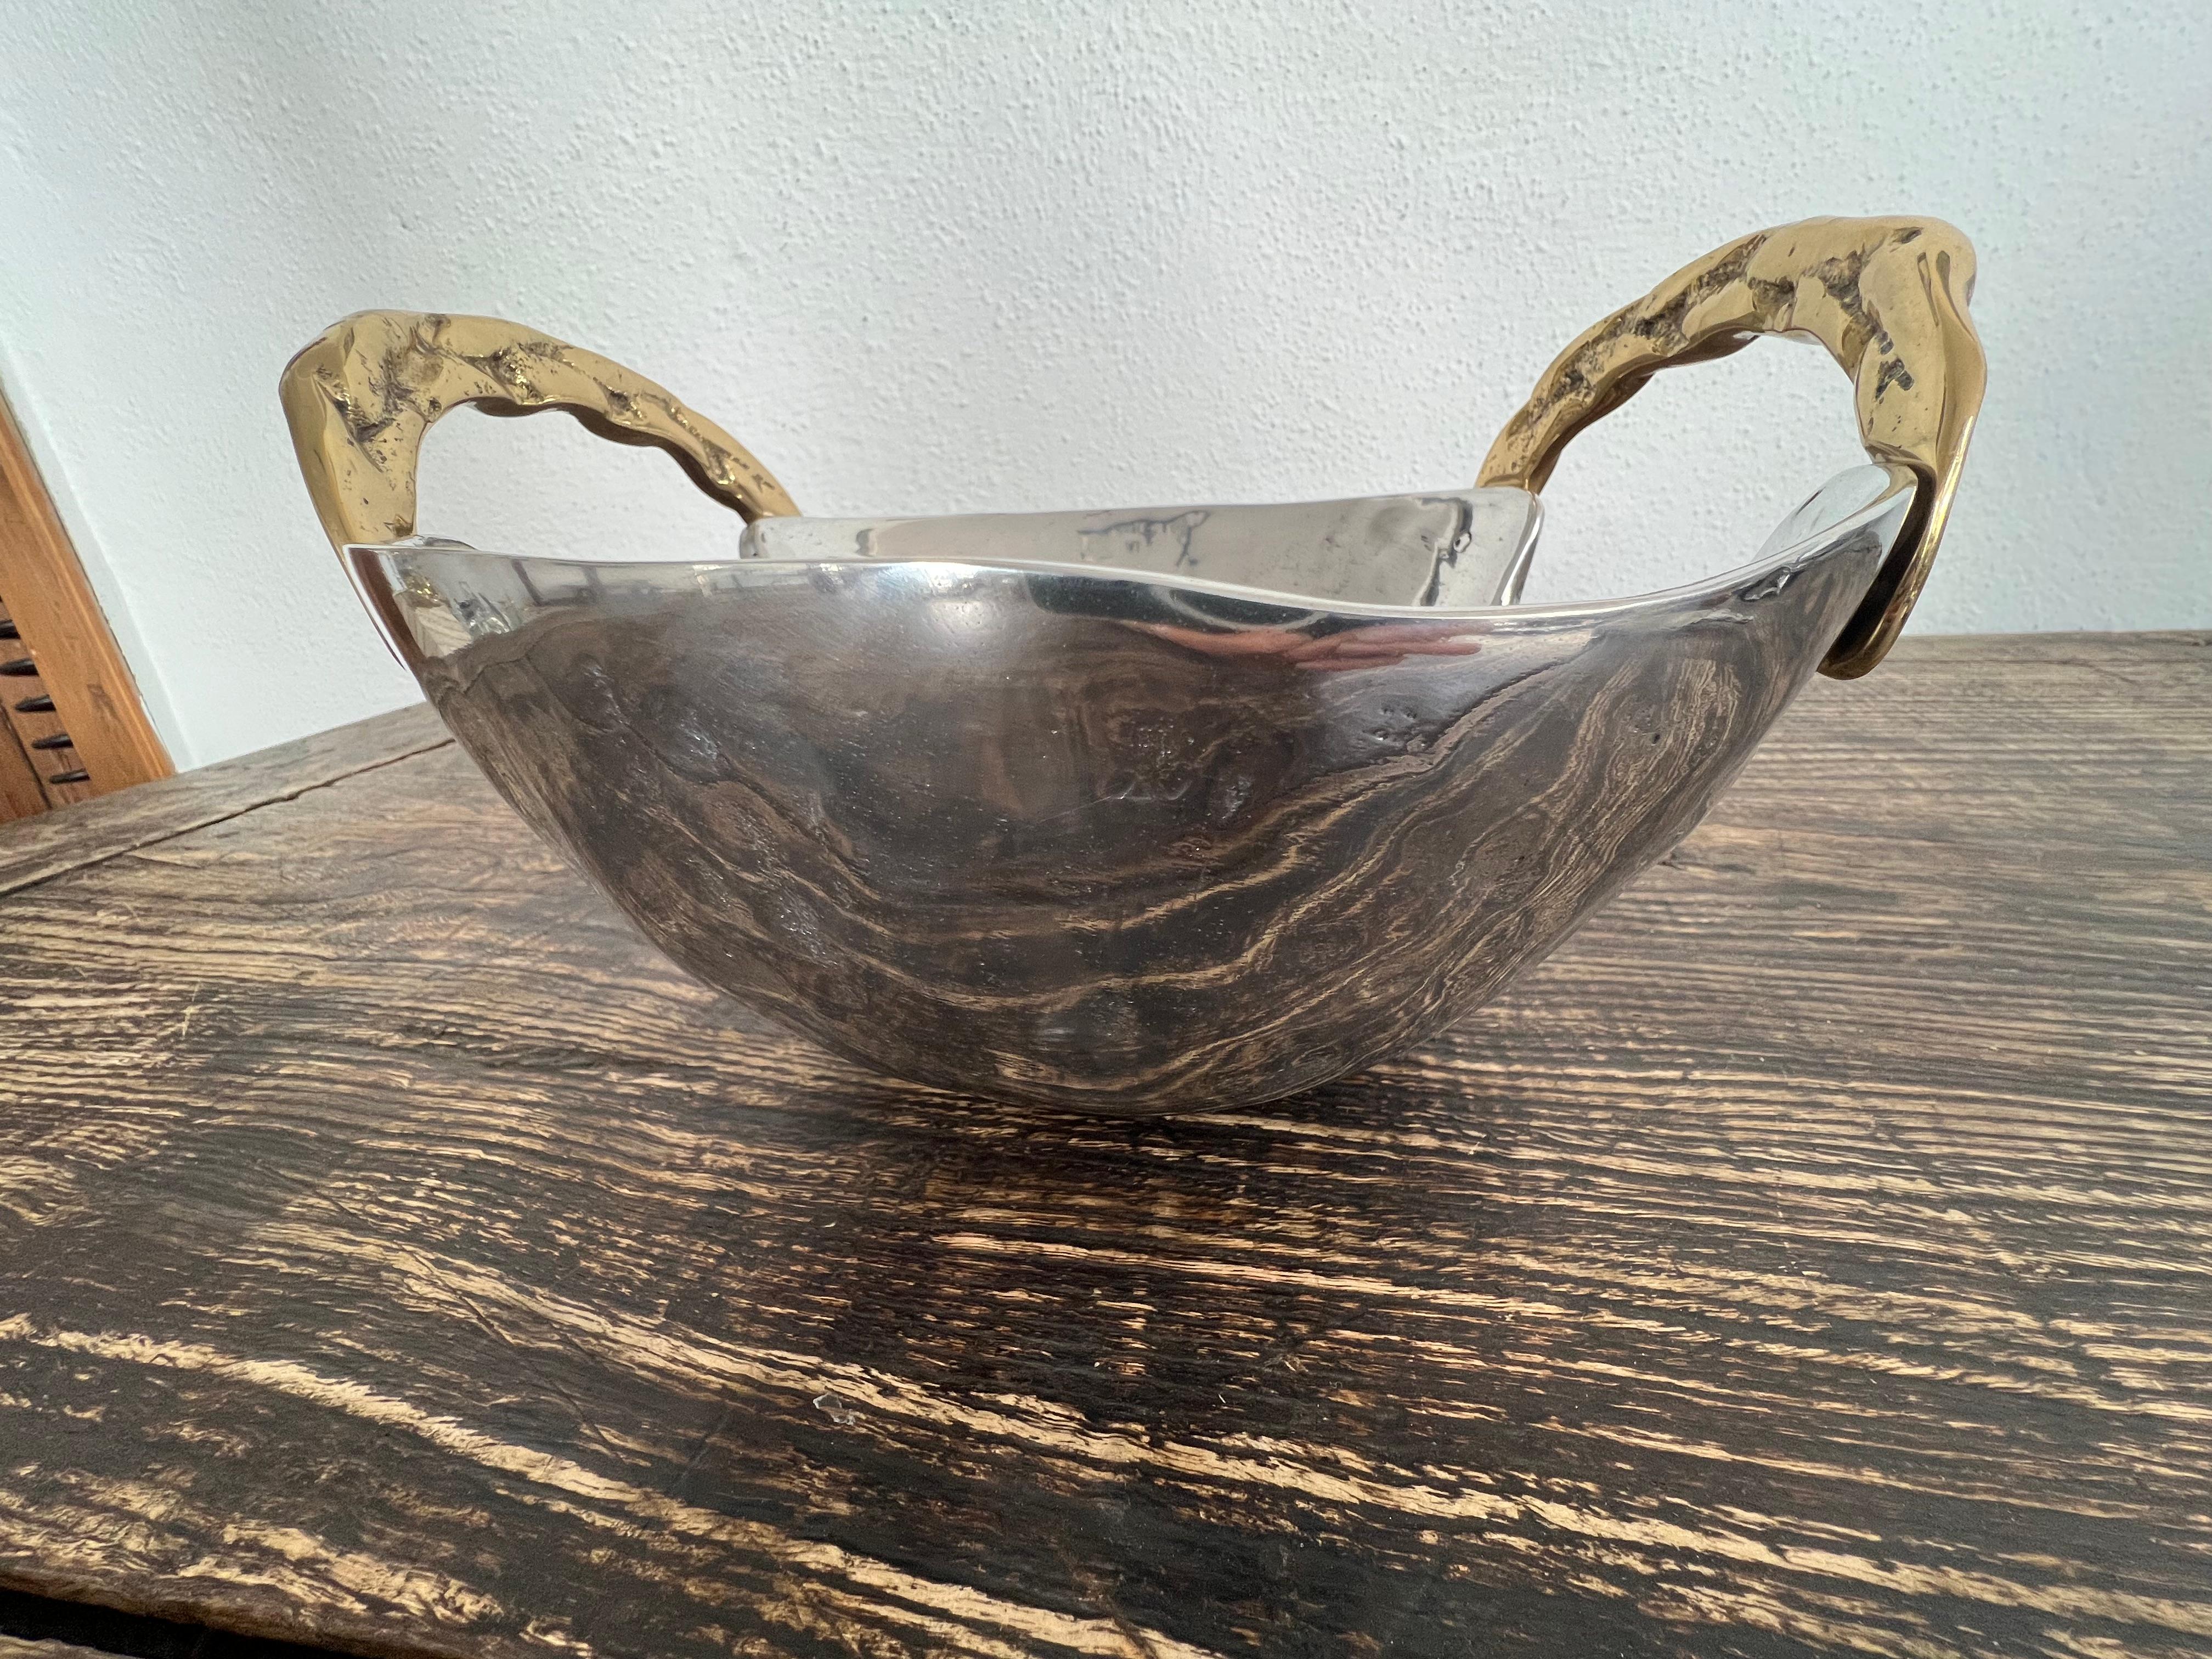 The decorative Celtic Bowl was created by David Marshall, it is made of sand cast aluminum and sand cast brass.
Handmade, mounted and finished in our foundry and workshop in Spain from recycled materials.
Certified authentic by the Artist David